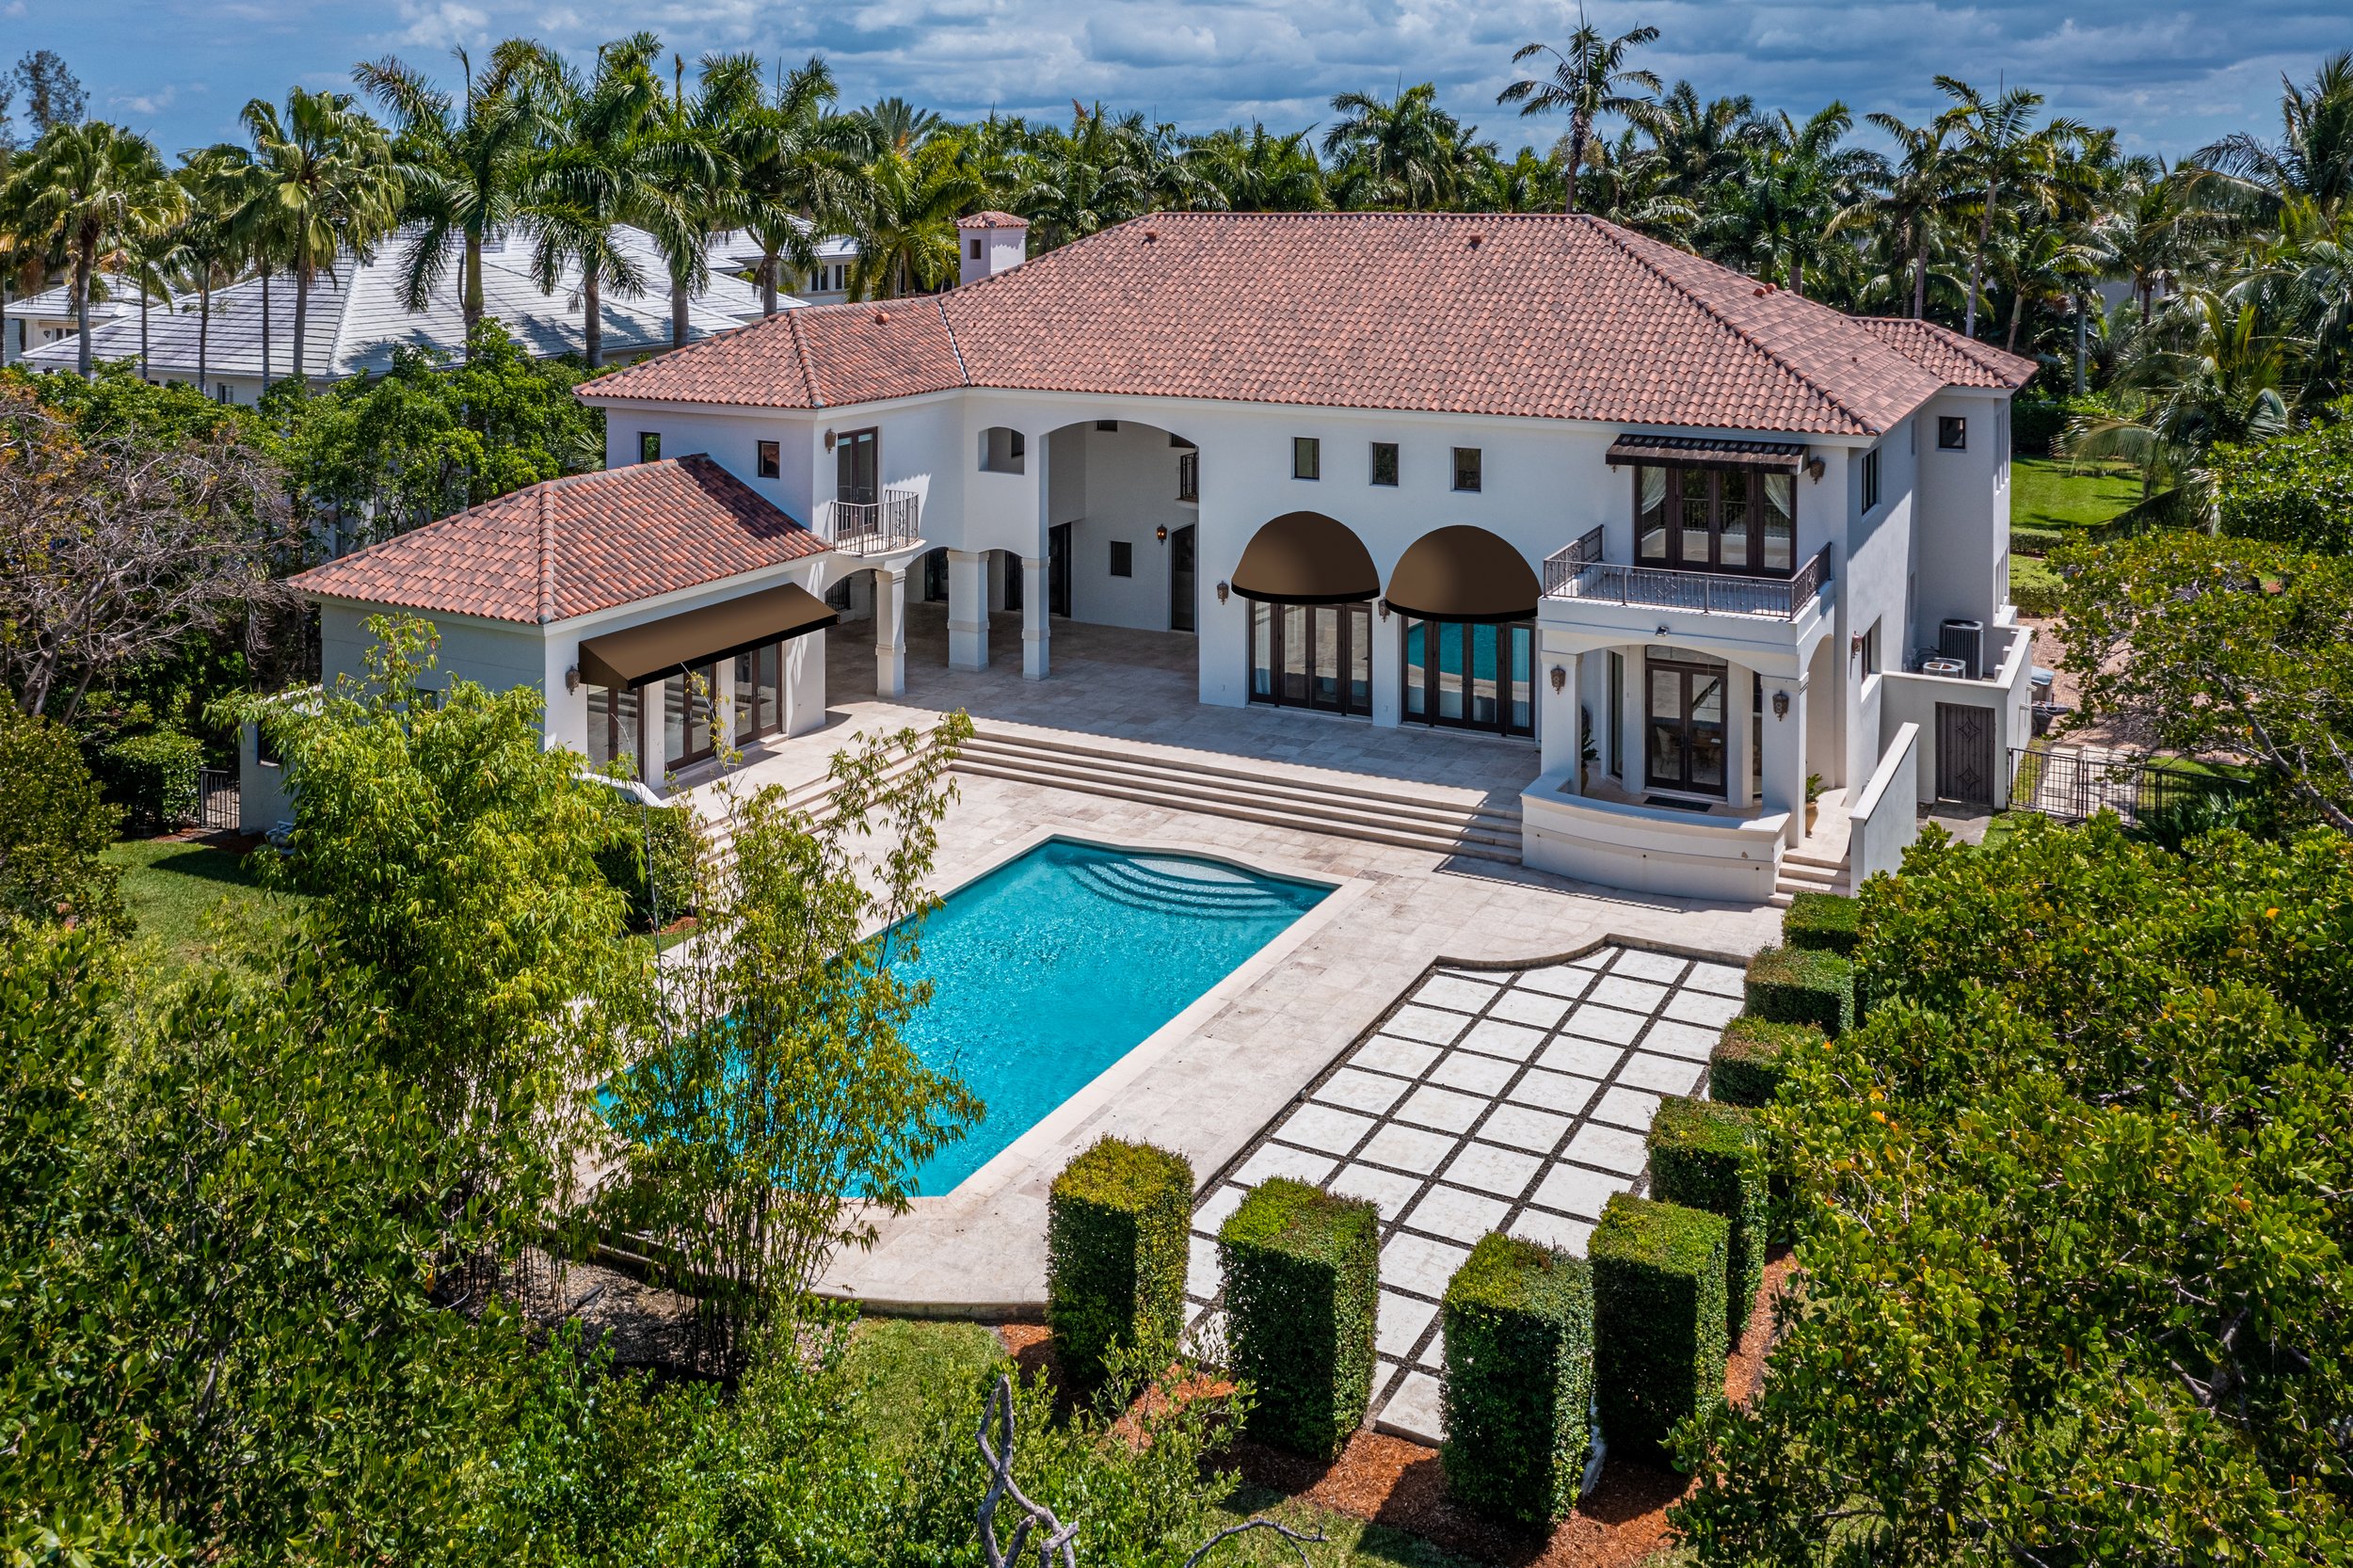 Step Inside This Coral Gables Mansion In The Exclusive Tahiti Beach Asking $12.9 Million 110.jpg